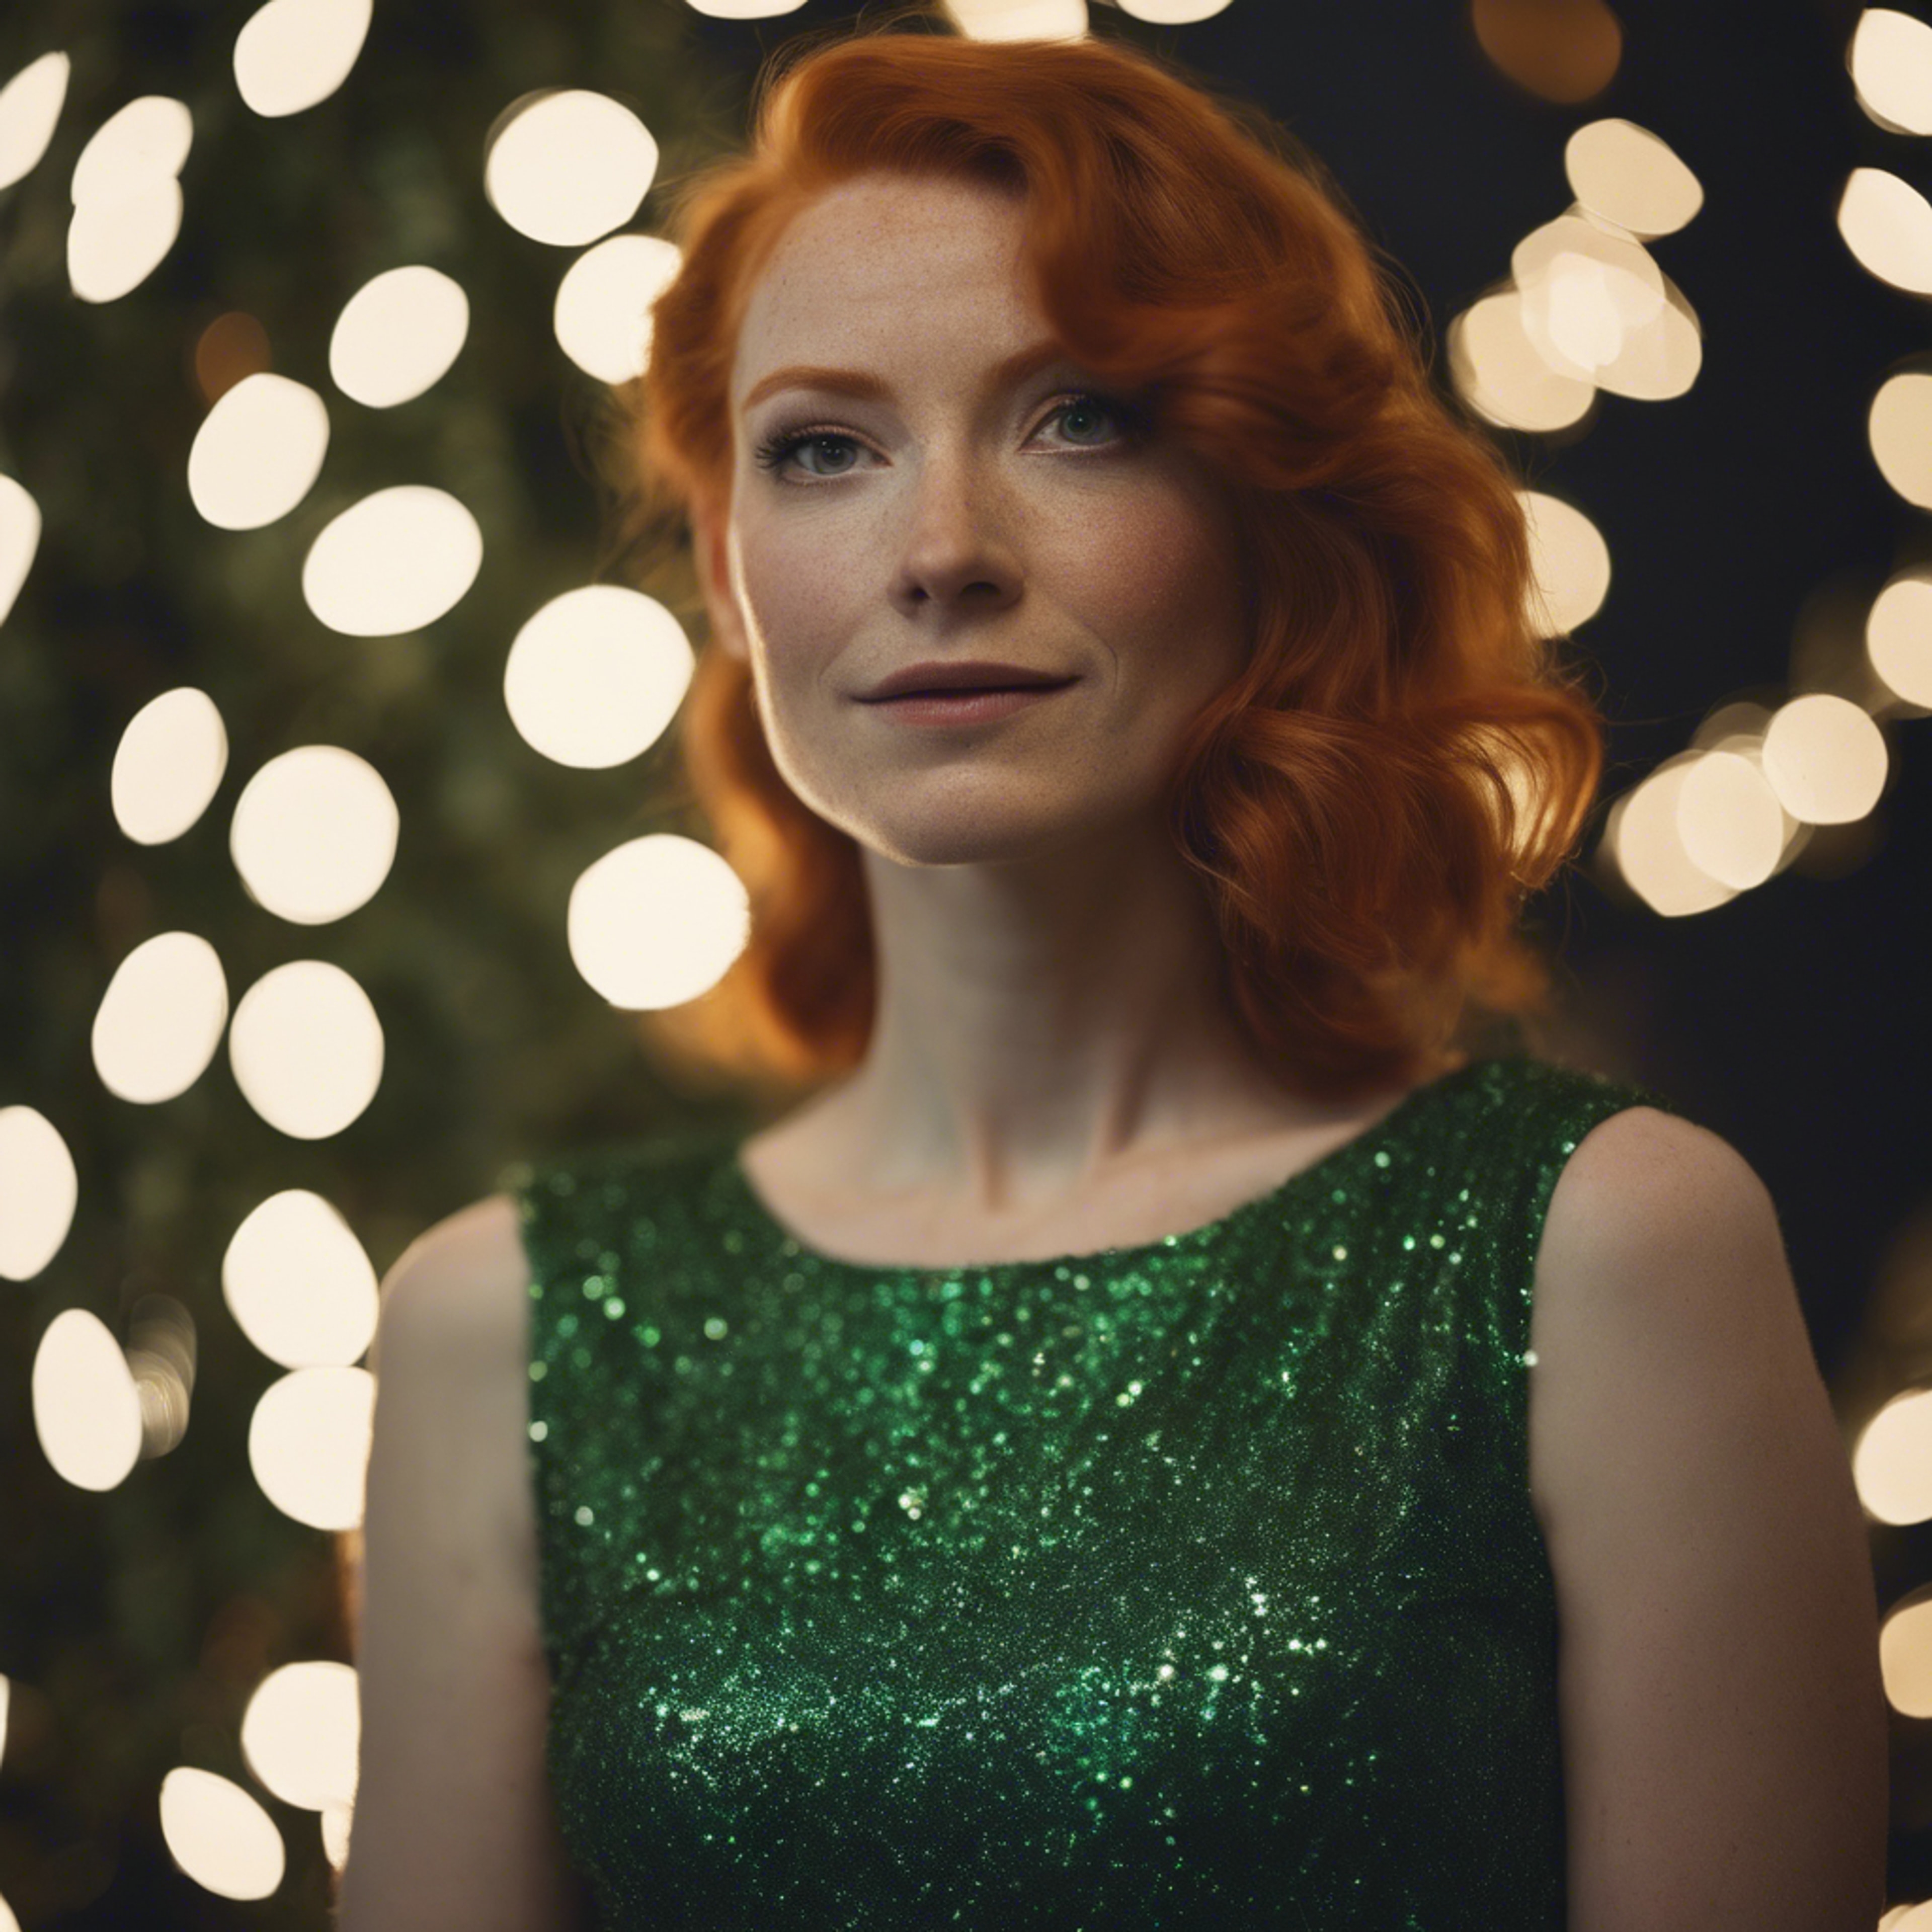 A redheaded woman wearing a sparkly green dress at a Christmas party Tapeta[a7aea6b7222f4d2facc9]